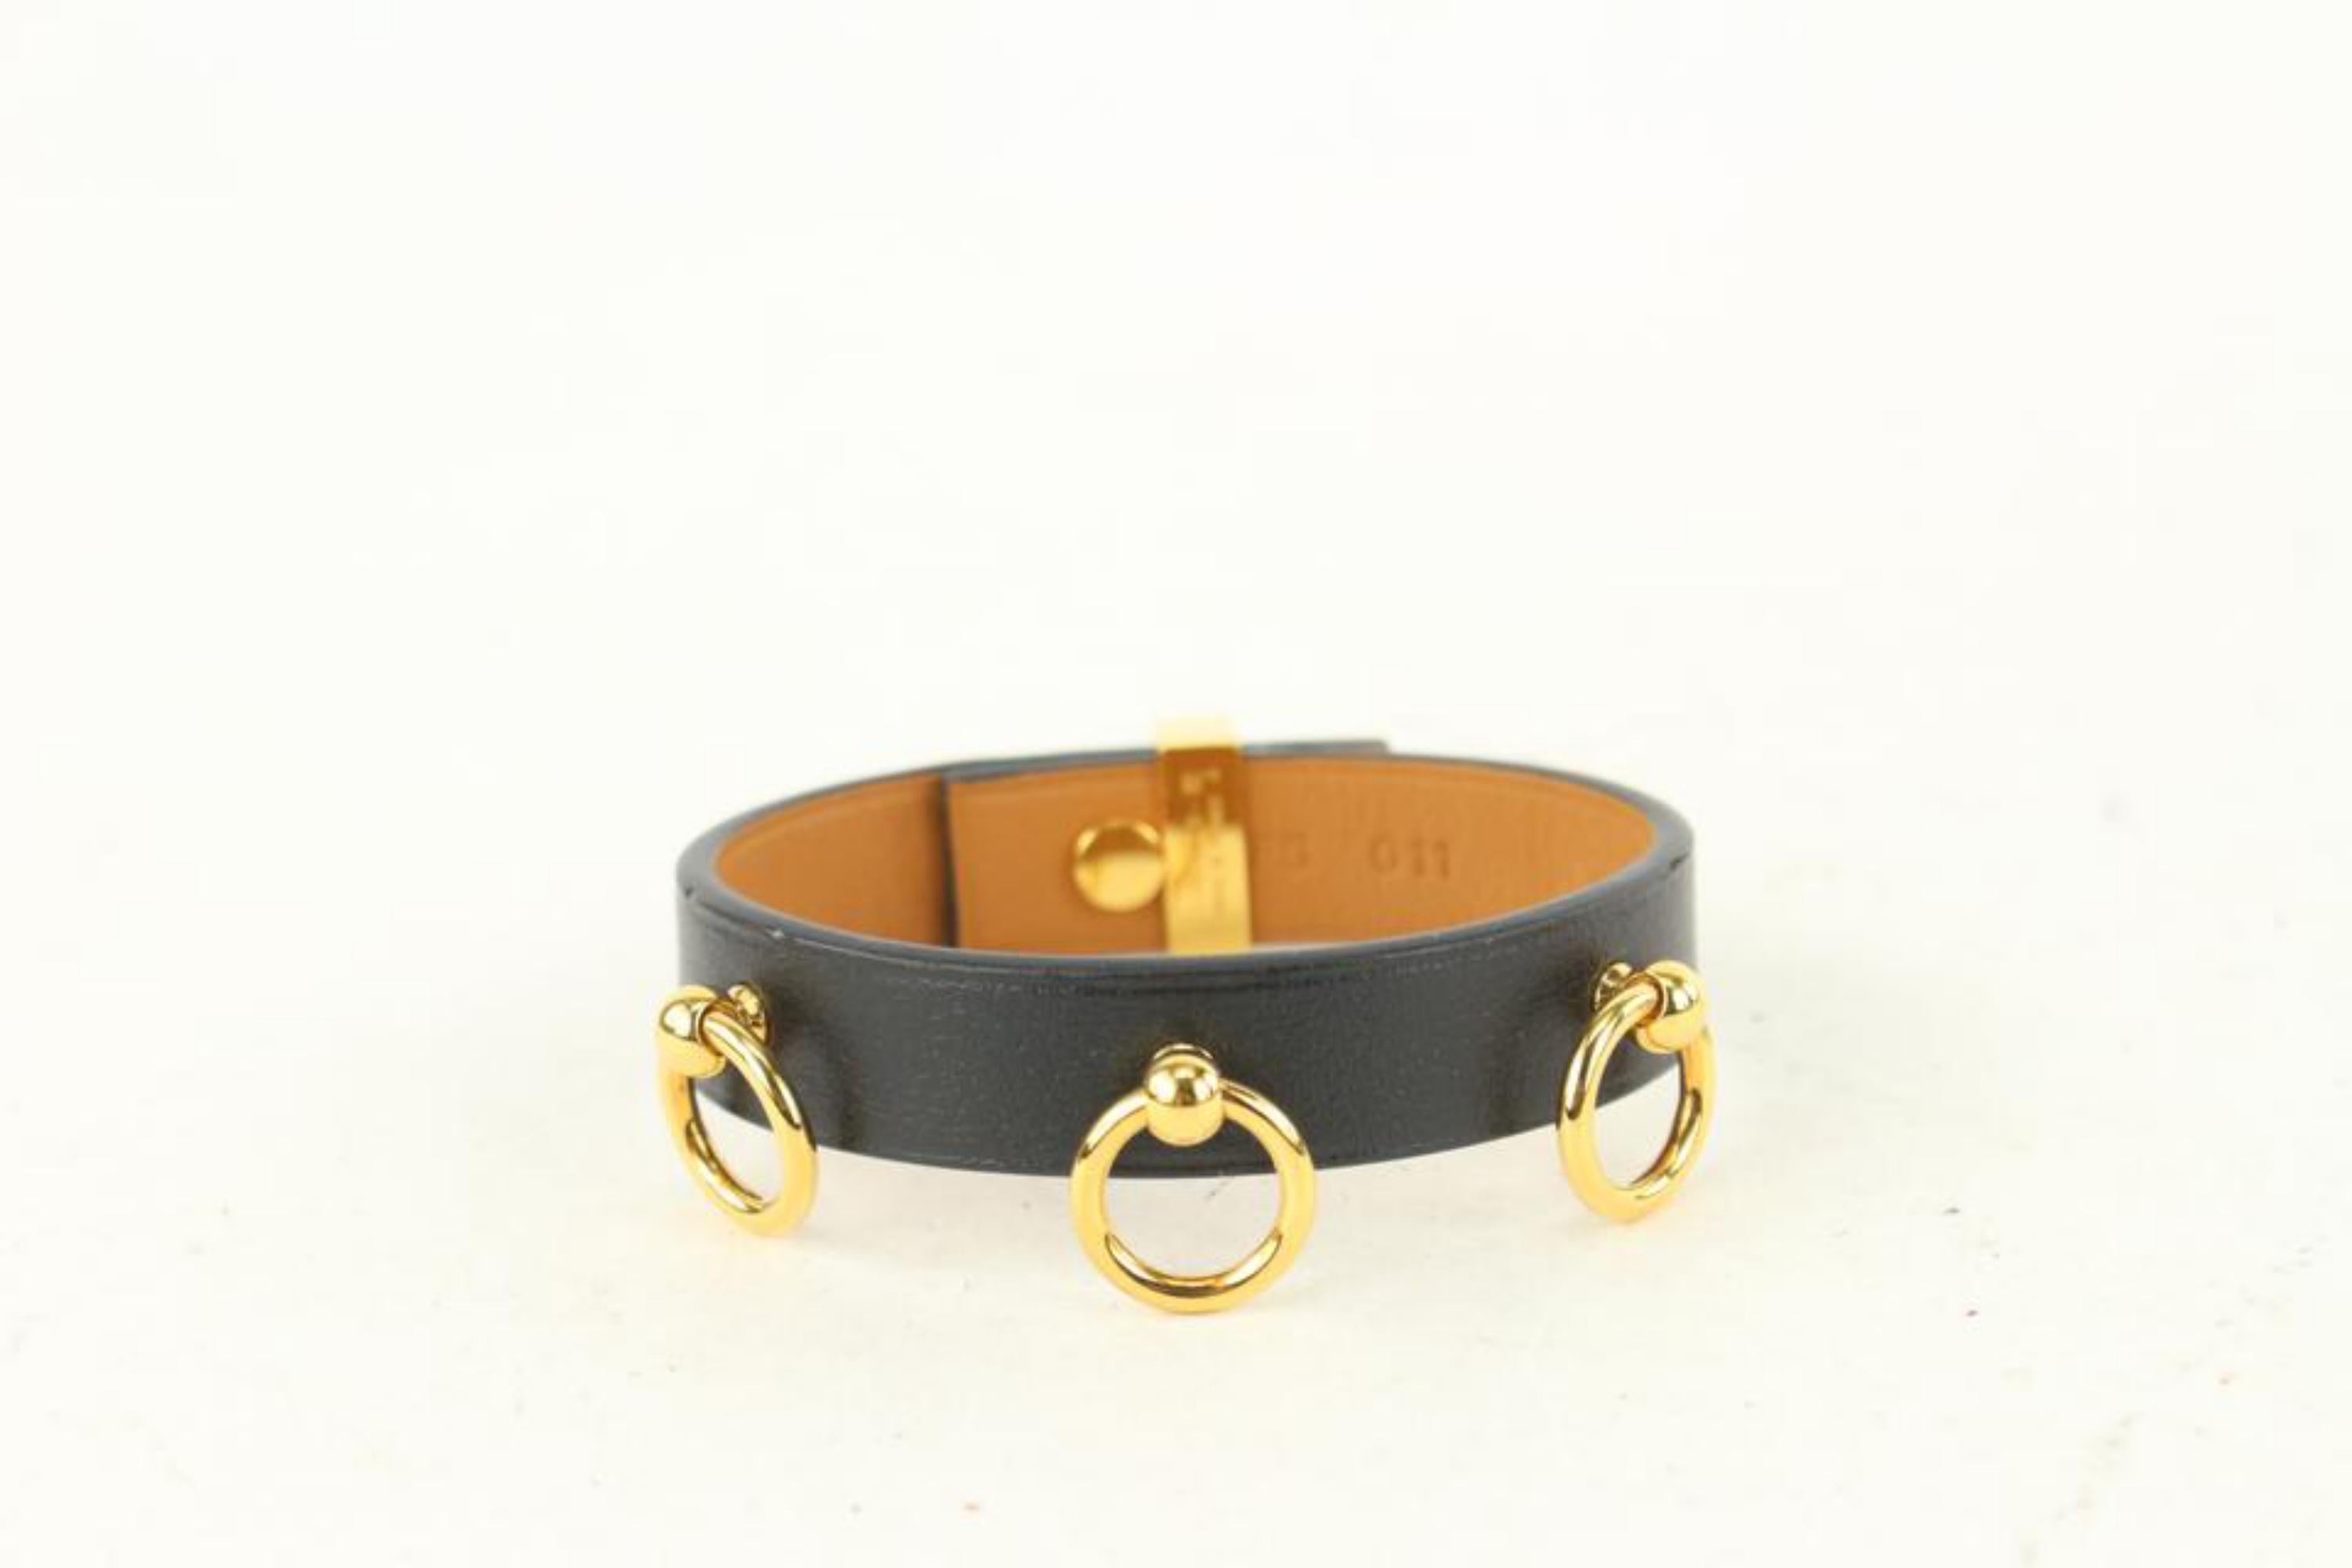 Hermès Black Mini Dog Anneaux Bracelet Cuff Kelly Bangle 0H14 In Good Condition For Sale In Dix hills, NY